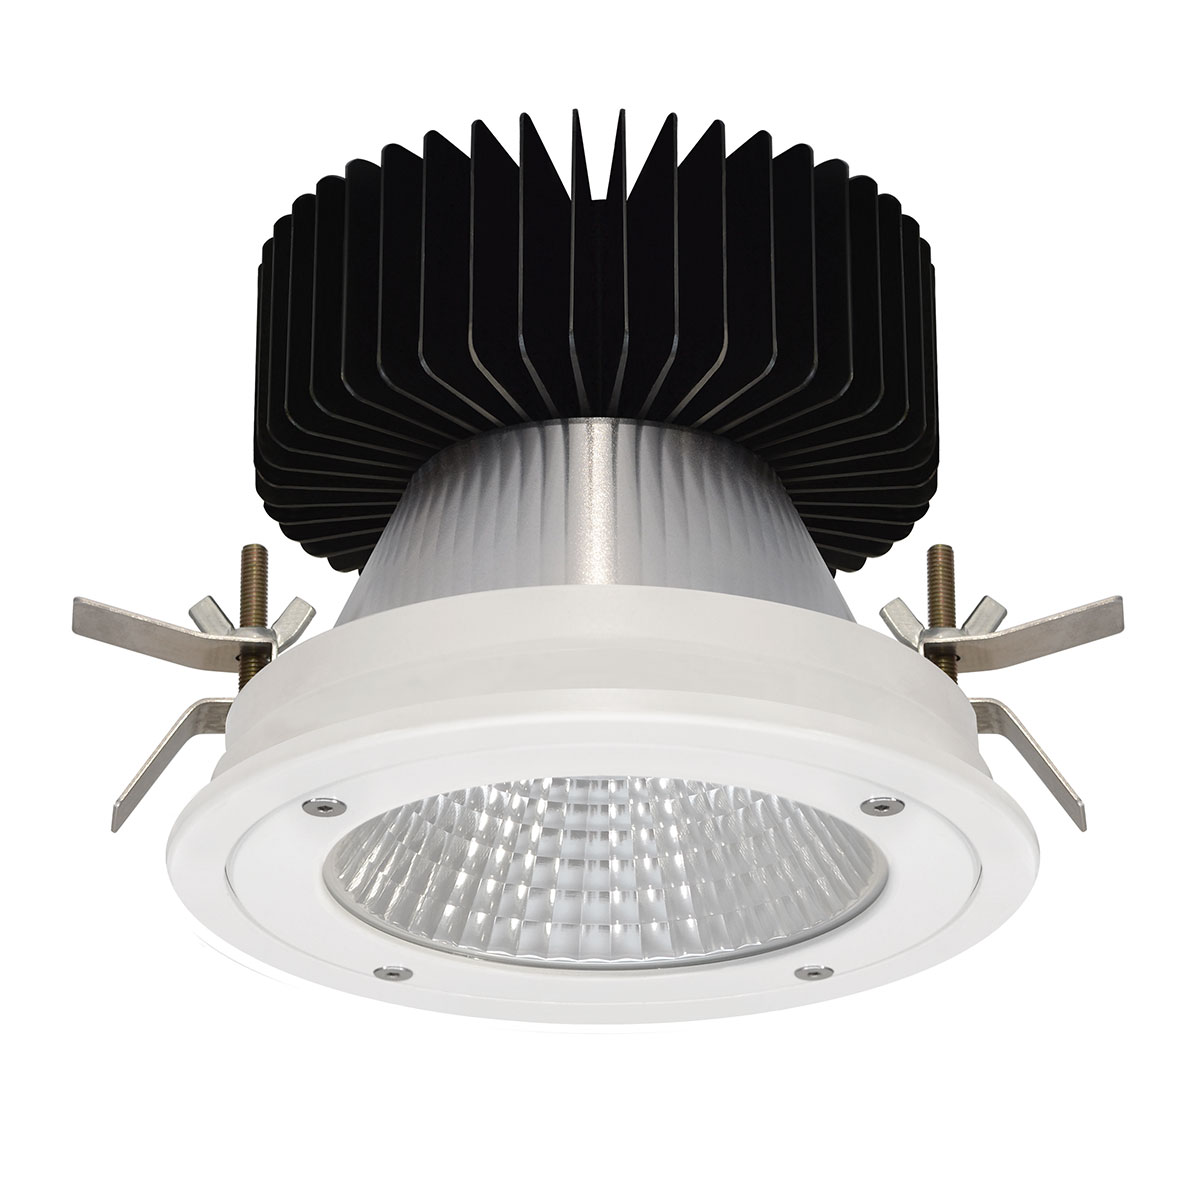 Kopa 35W Anti Tamper Fixed Round Recessed Downlight IP65 Rated 60° Degree Reflector White